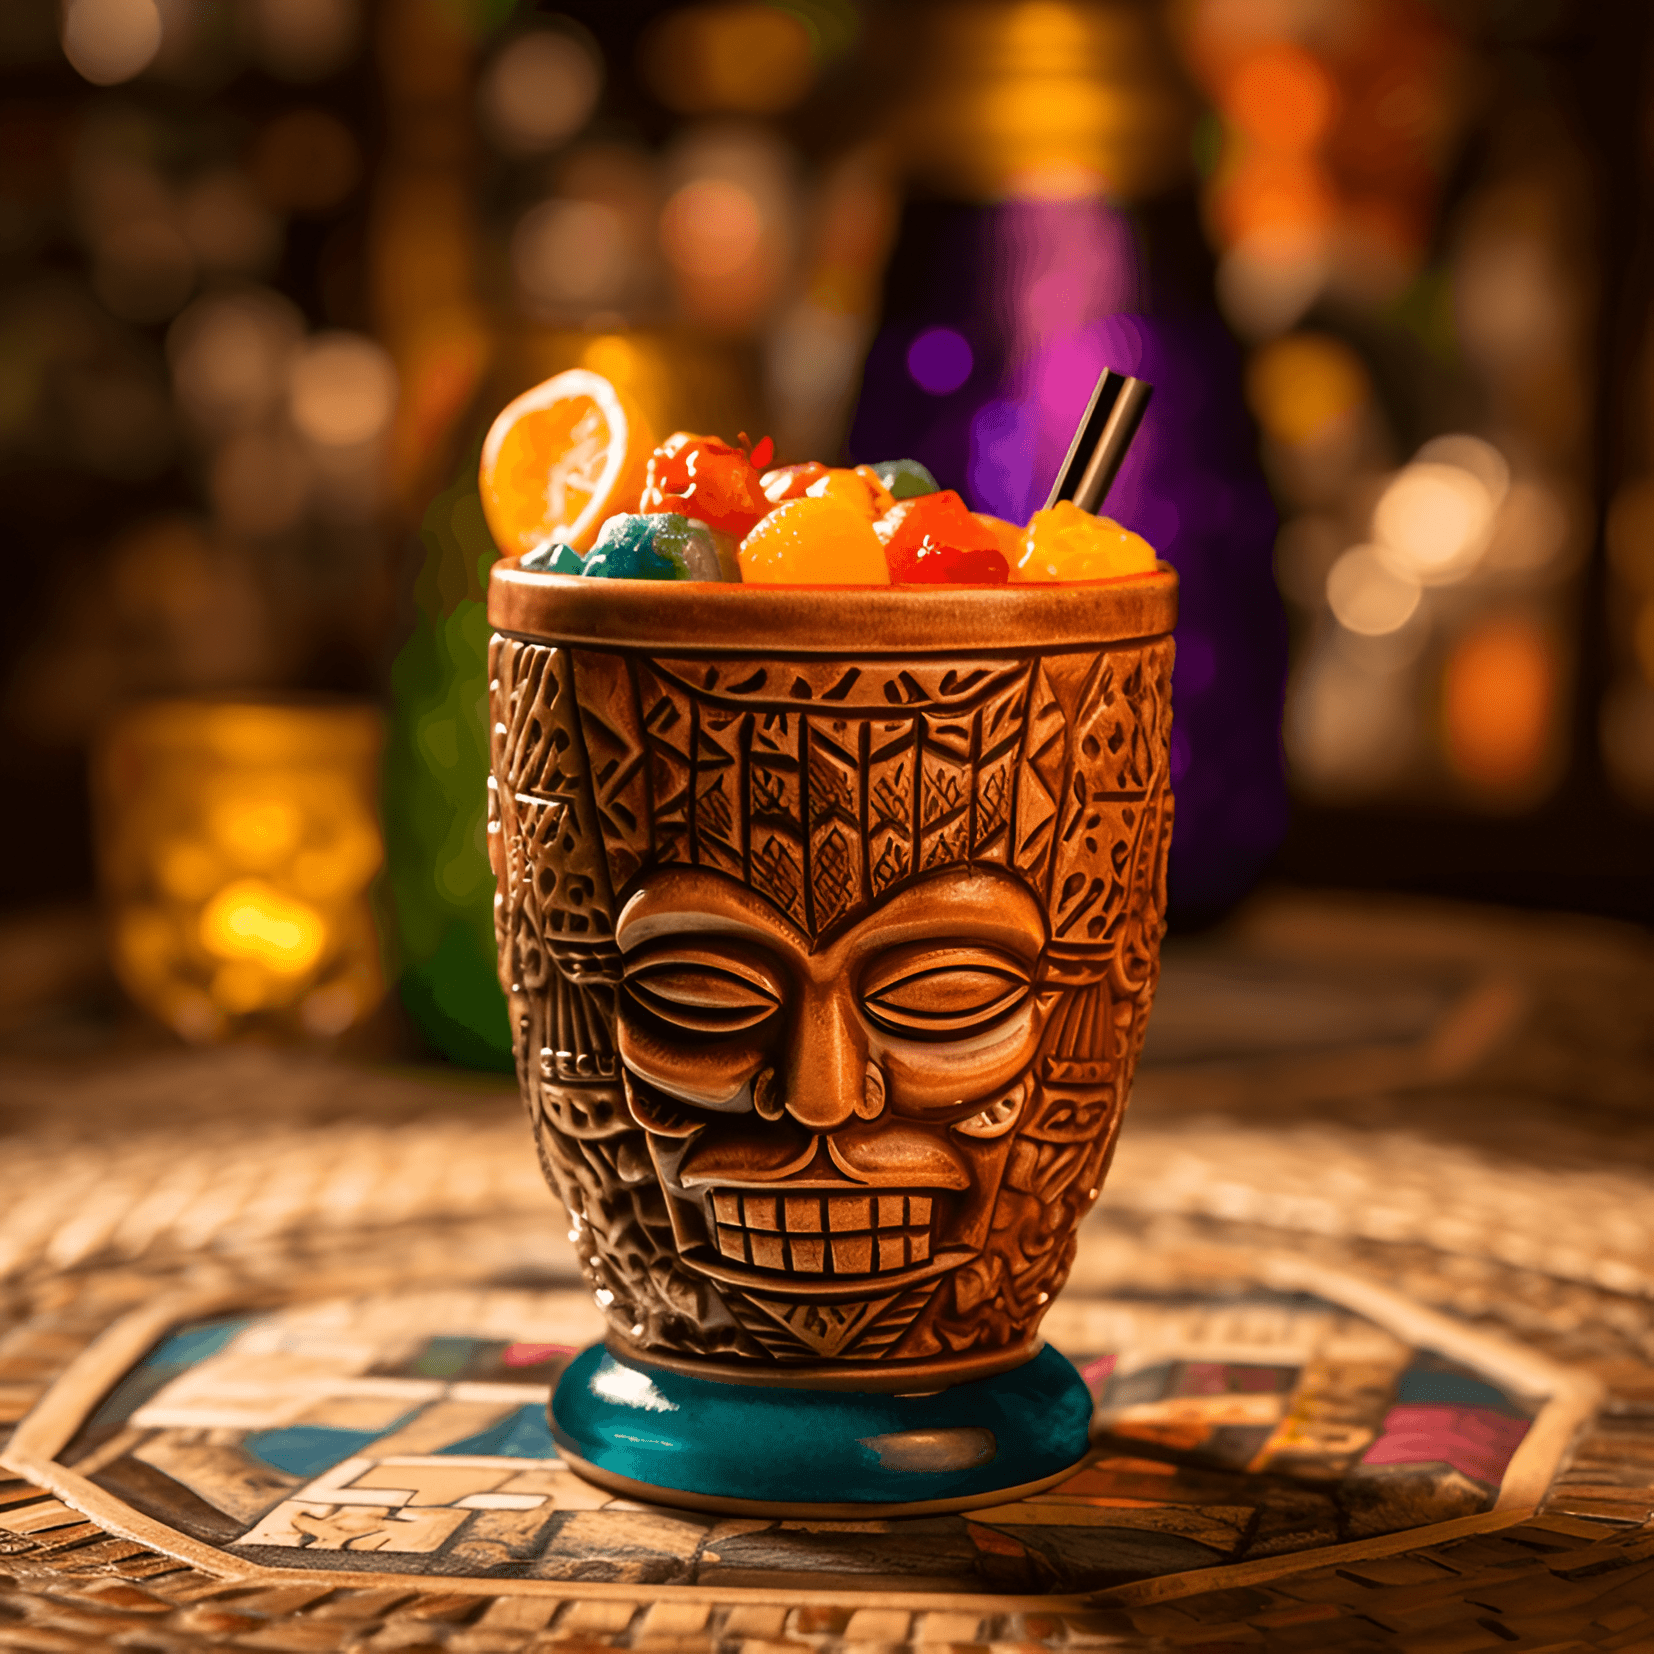 Headhunter Cocktail Recipe - The Headhunter cocktail is a delightful mix of sweet, sour, and fruity flavors. It has a strong tropical taste, with hints of citrus and pineapple. The rum adds a warm, smooth finish to the drink.